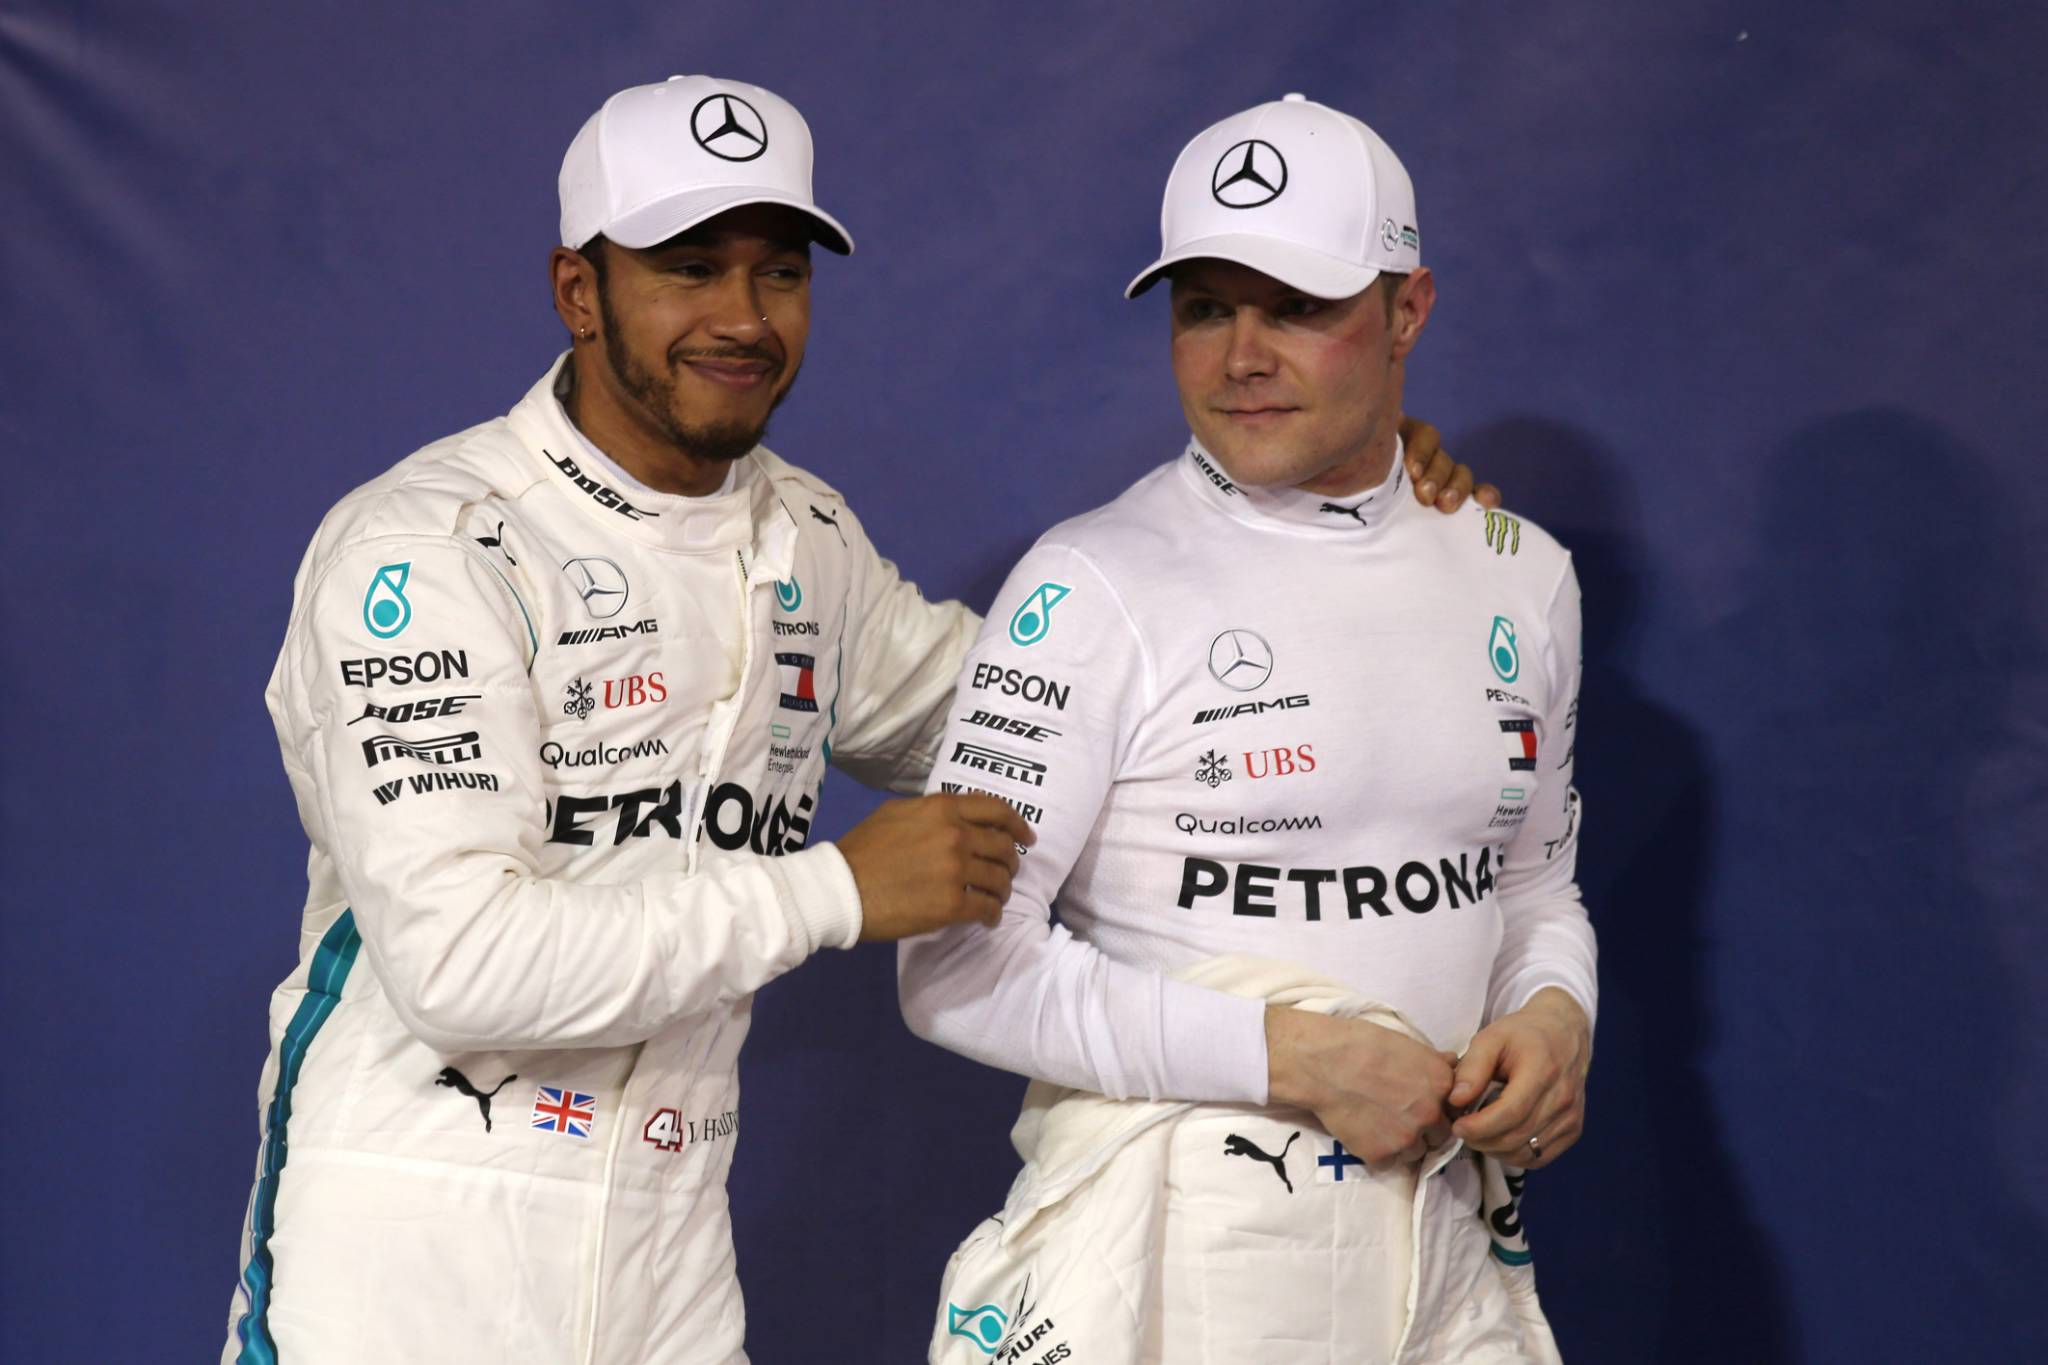 24.11.2018 - Qualifying, Lewis Hamilton (GBR) Mercedes AMG F1 W09 pole position and 2nd place Valtteri Bottas (FIN) Mercedes AMG F1 W09